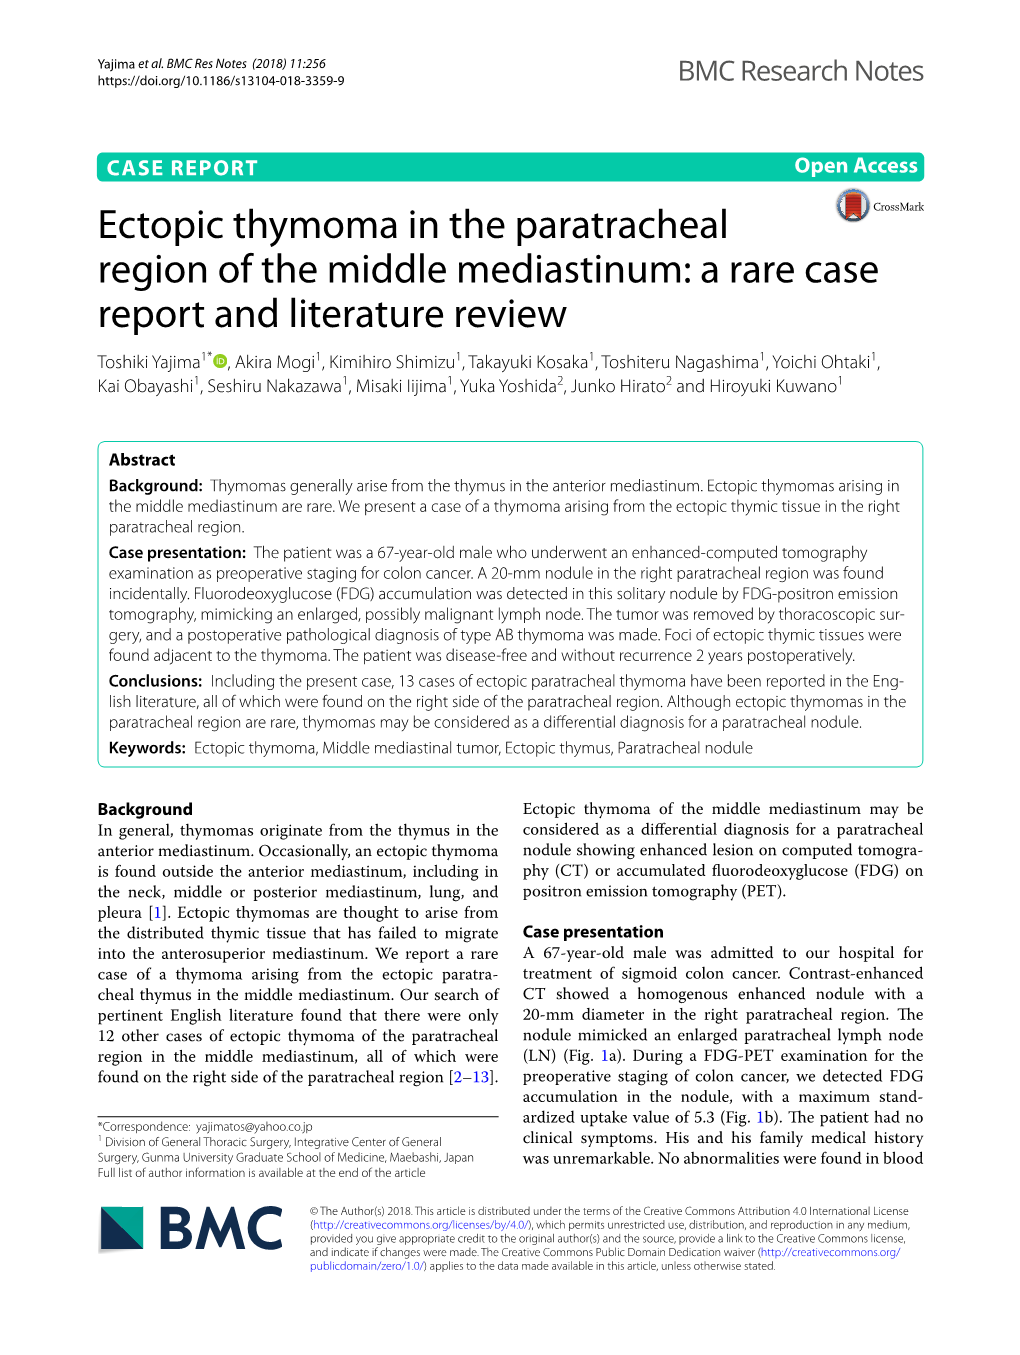 Ectopic Thymoma in the Paratracheal Region of the Middle Mediastinum